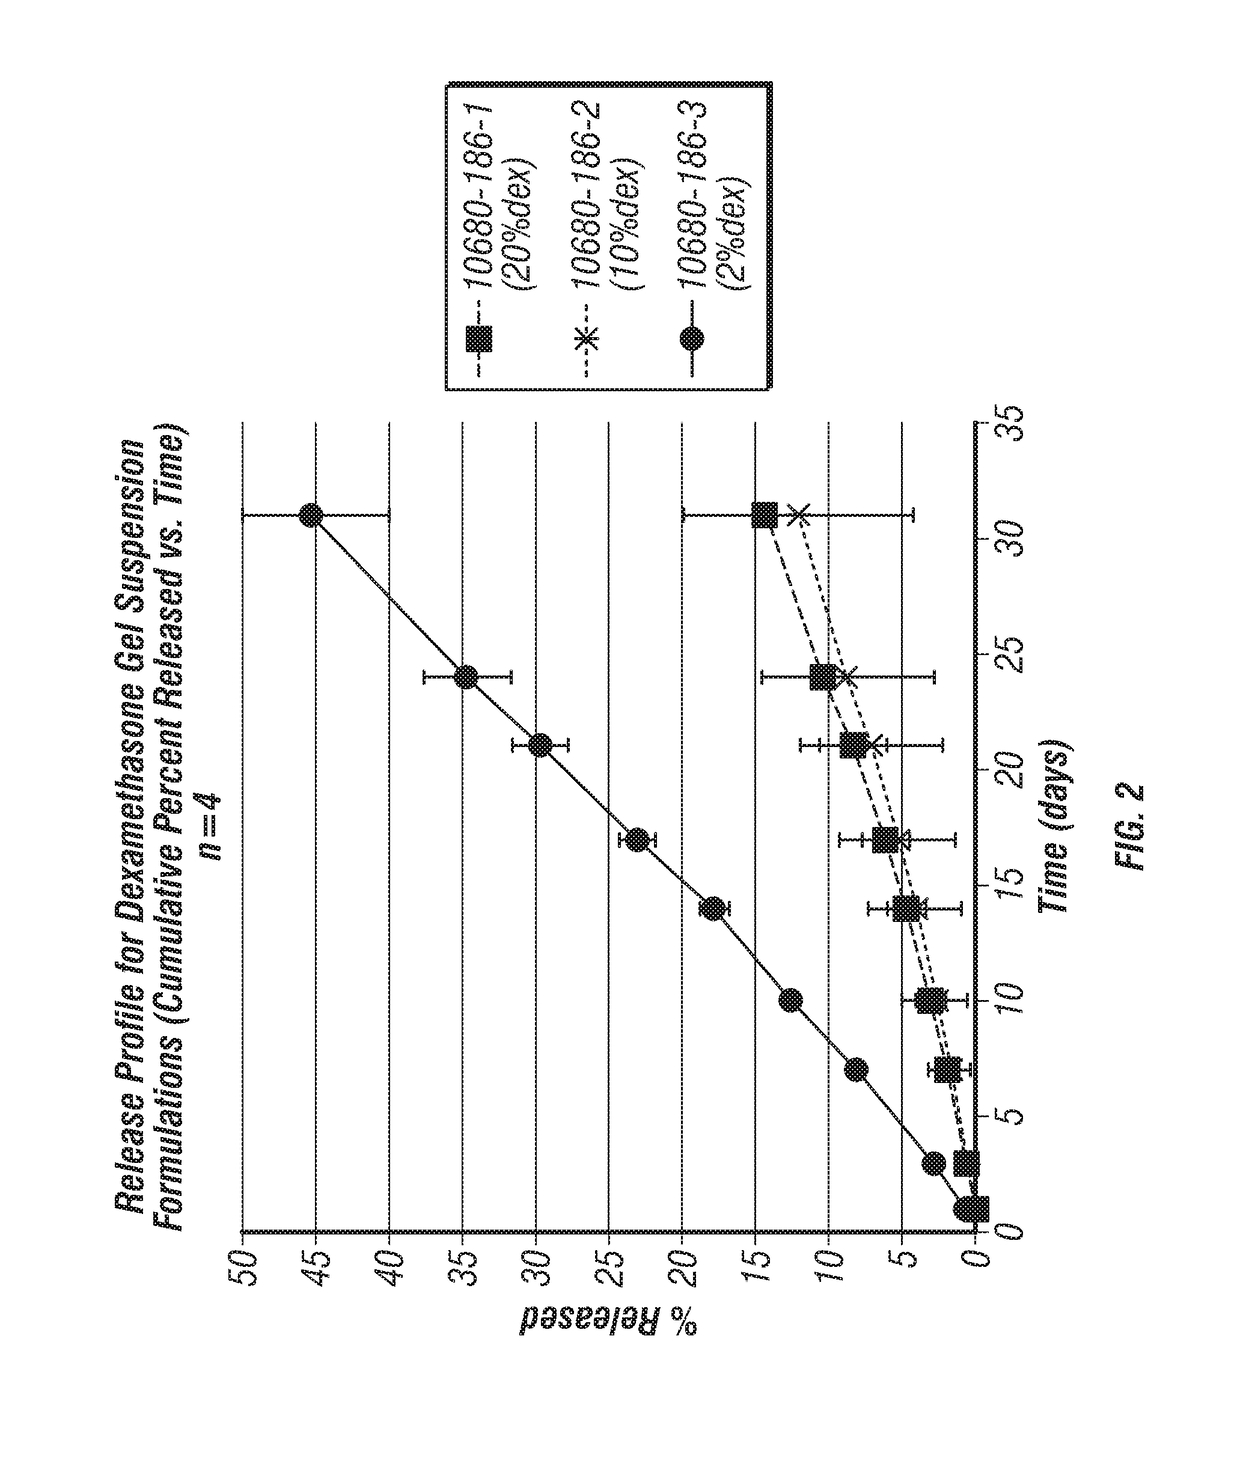 Joint fat pad formulations, and methods of use thereof